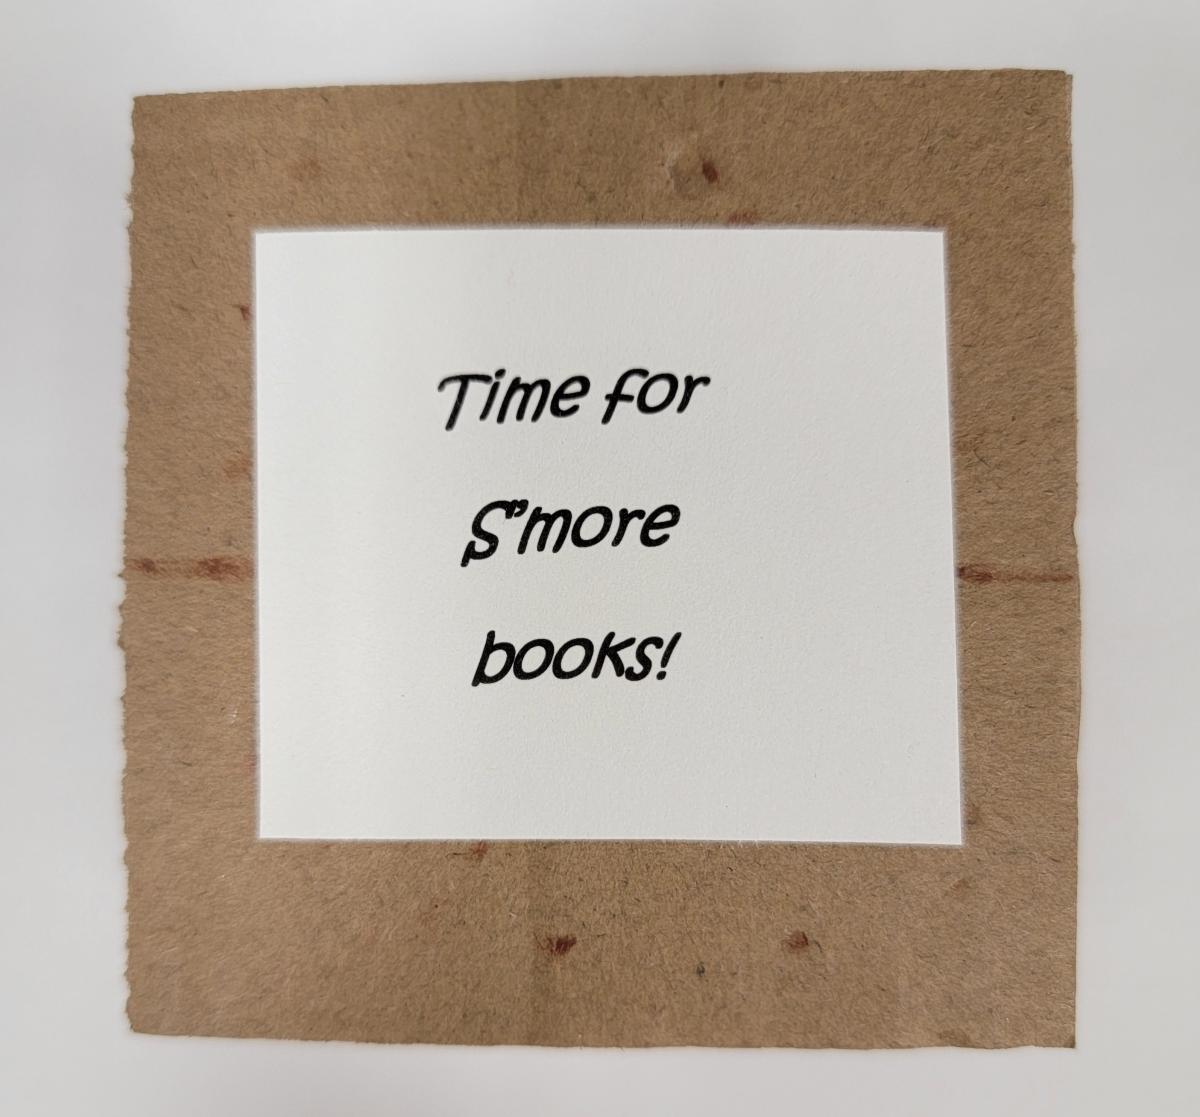 Time for S'More Books